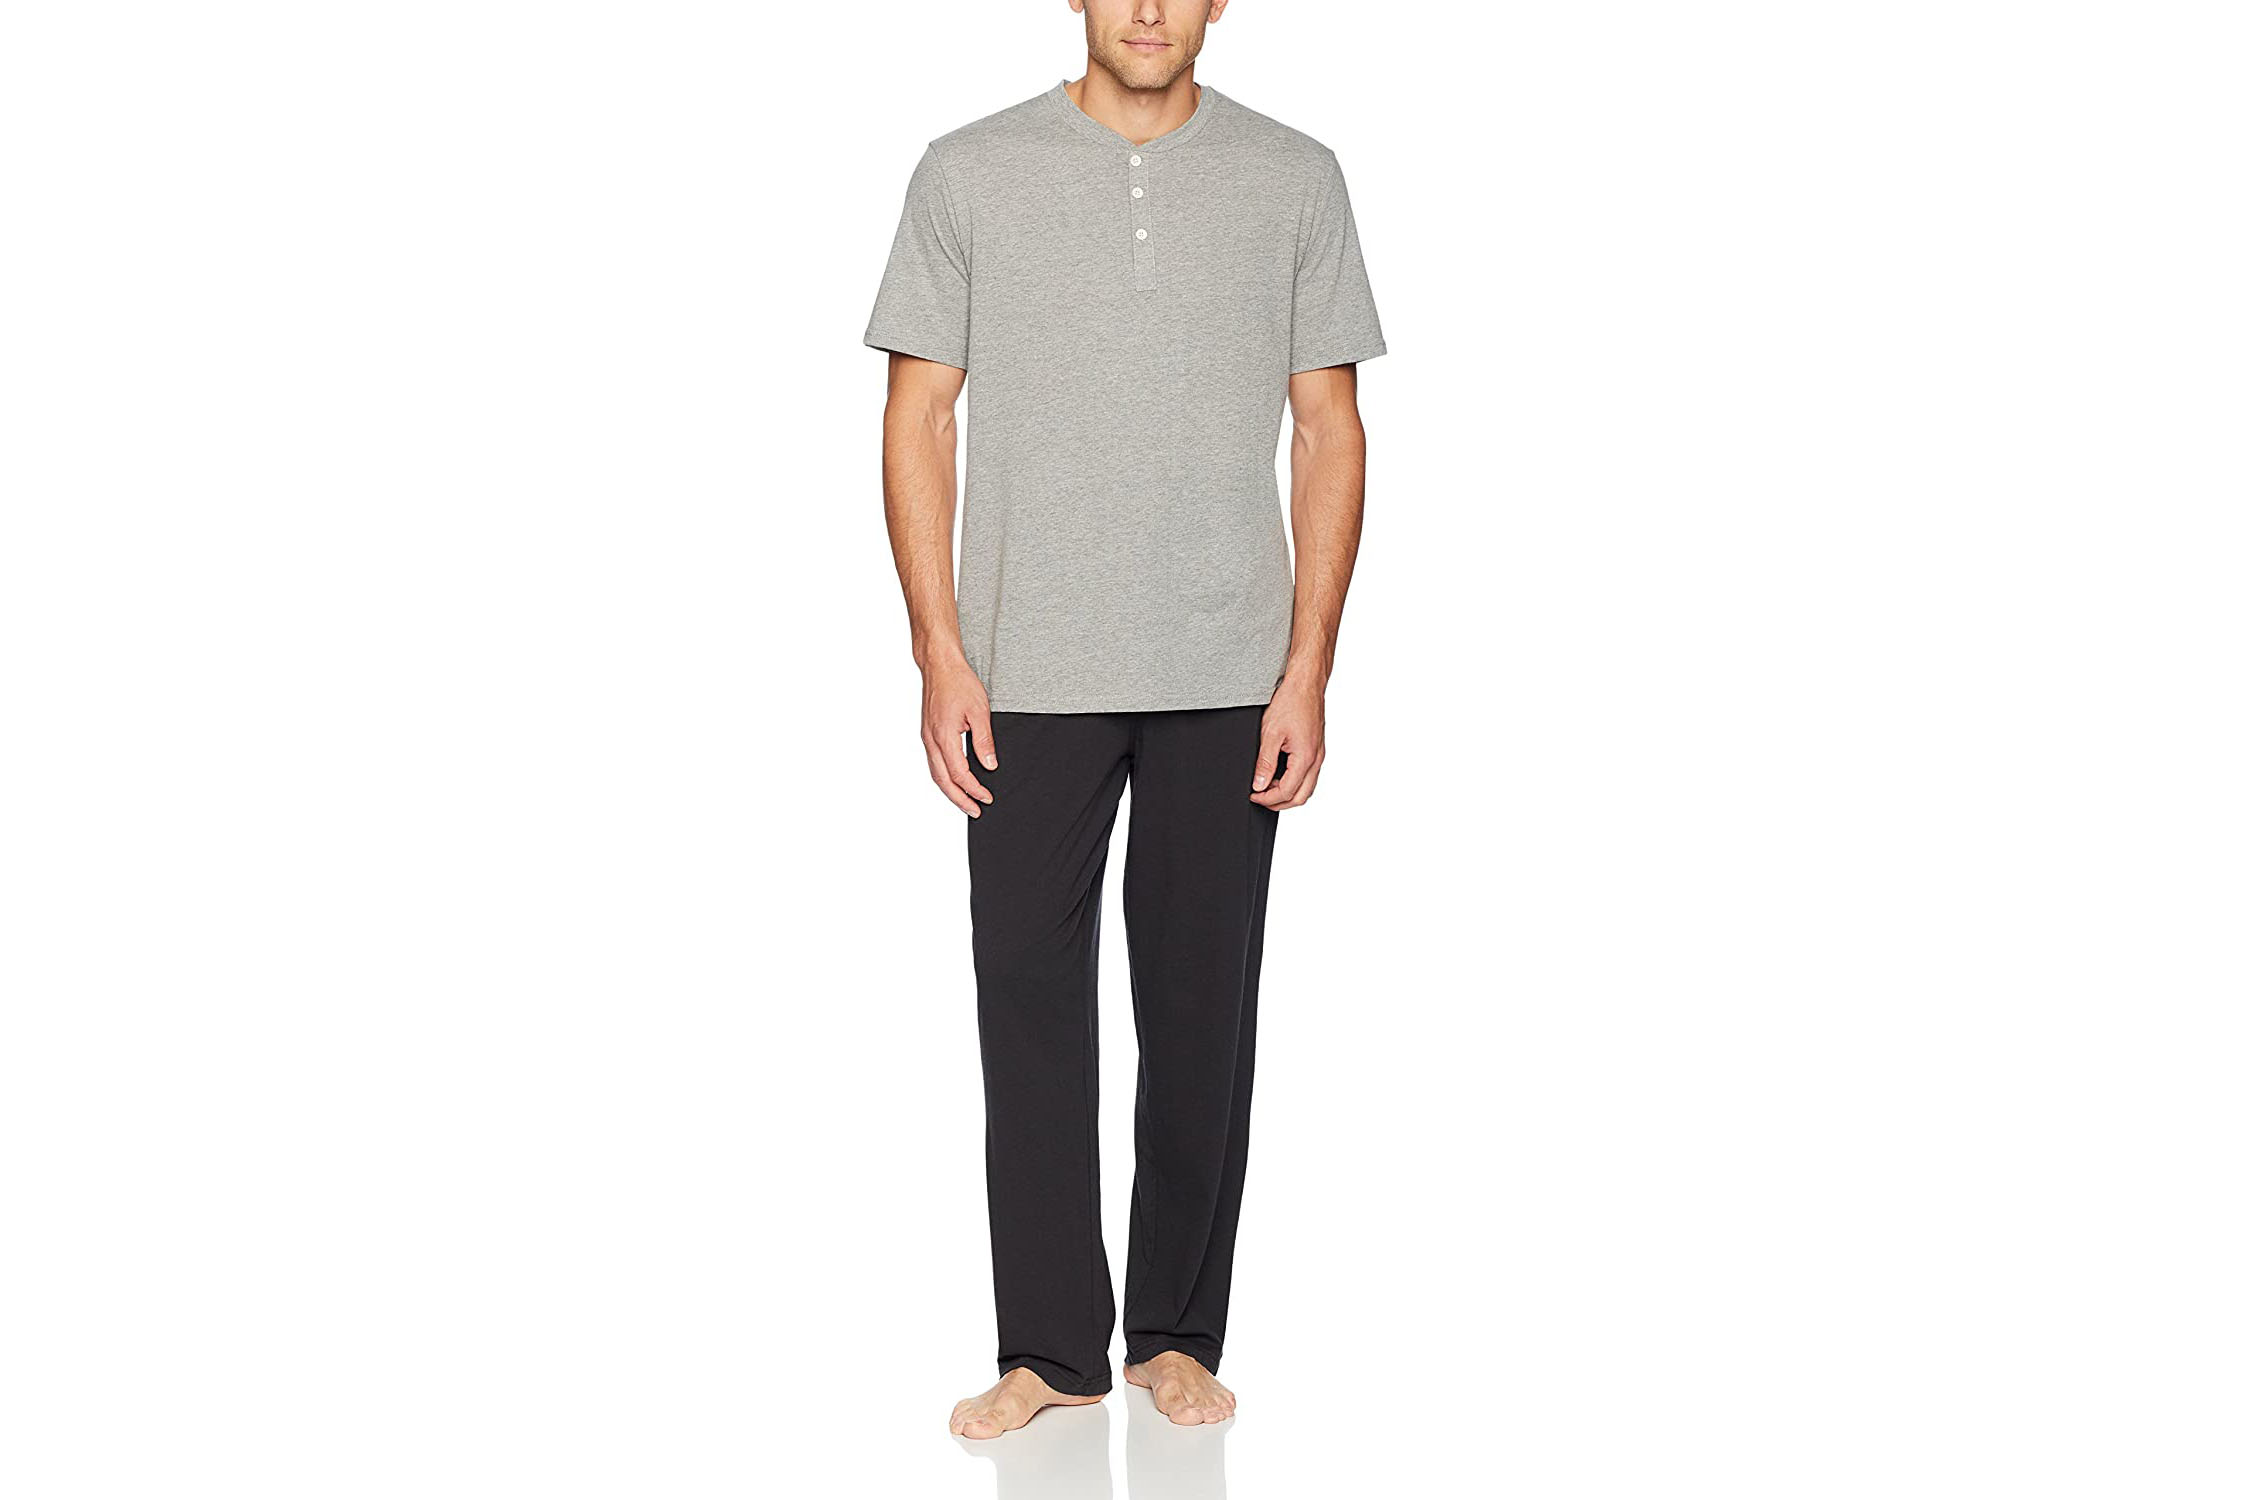 The 8 Best Men's Loungewear Sets to Wear Right Now - The Manual